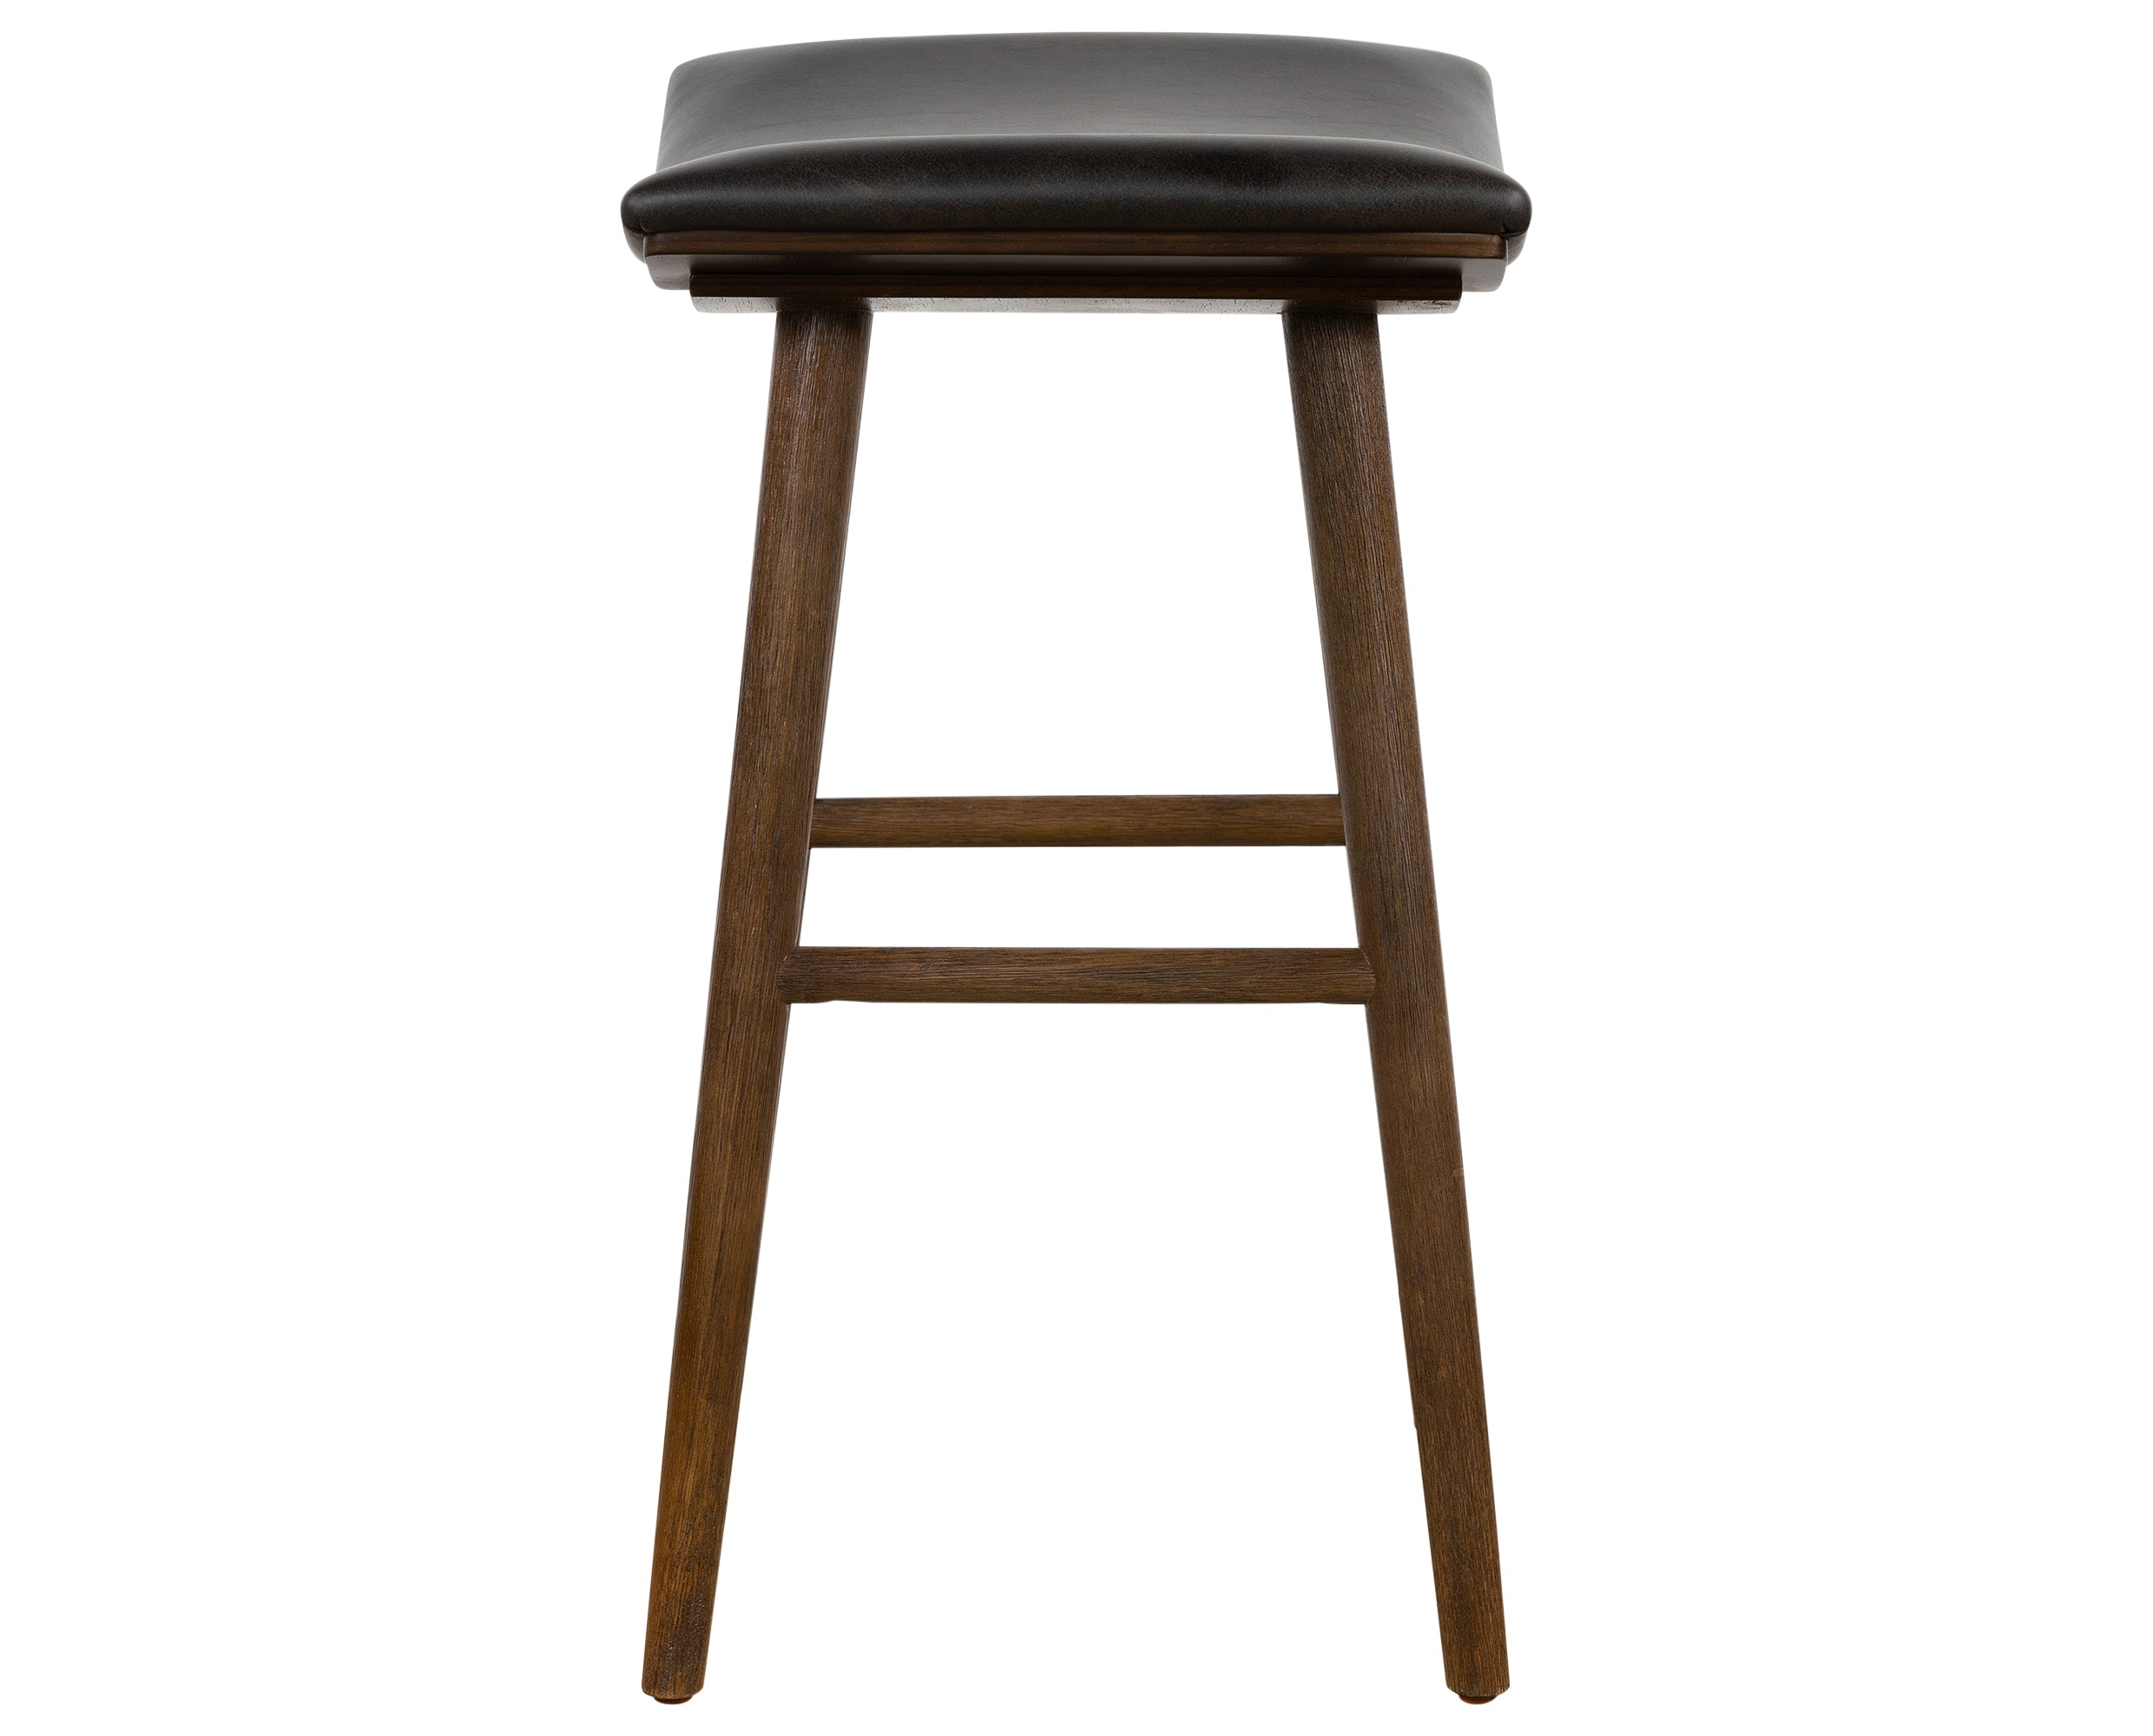 Distressed Black Faux Leather with Warm Parawood (Counter Height) | Union Bar/Counter Stool | Valley Ridge Furniture